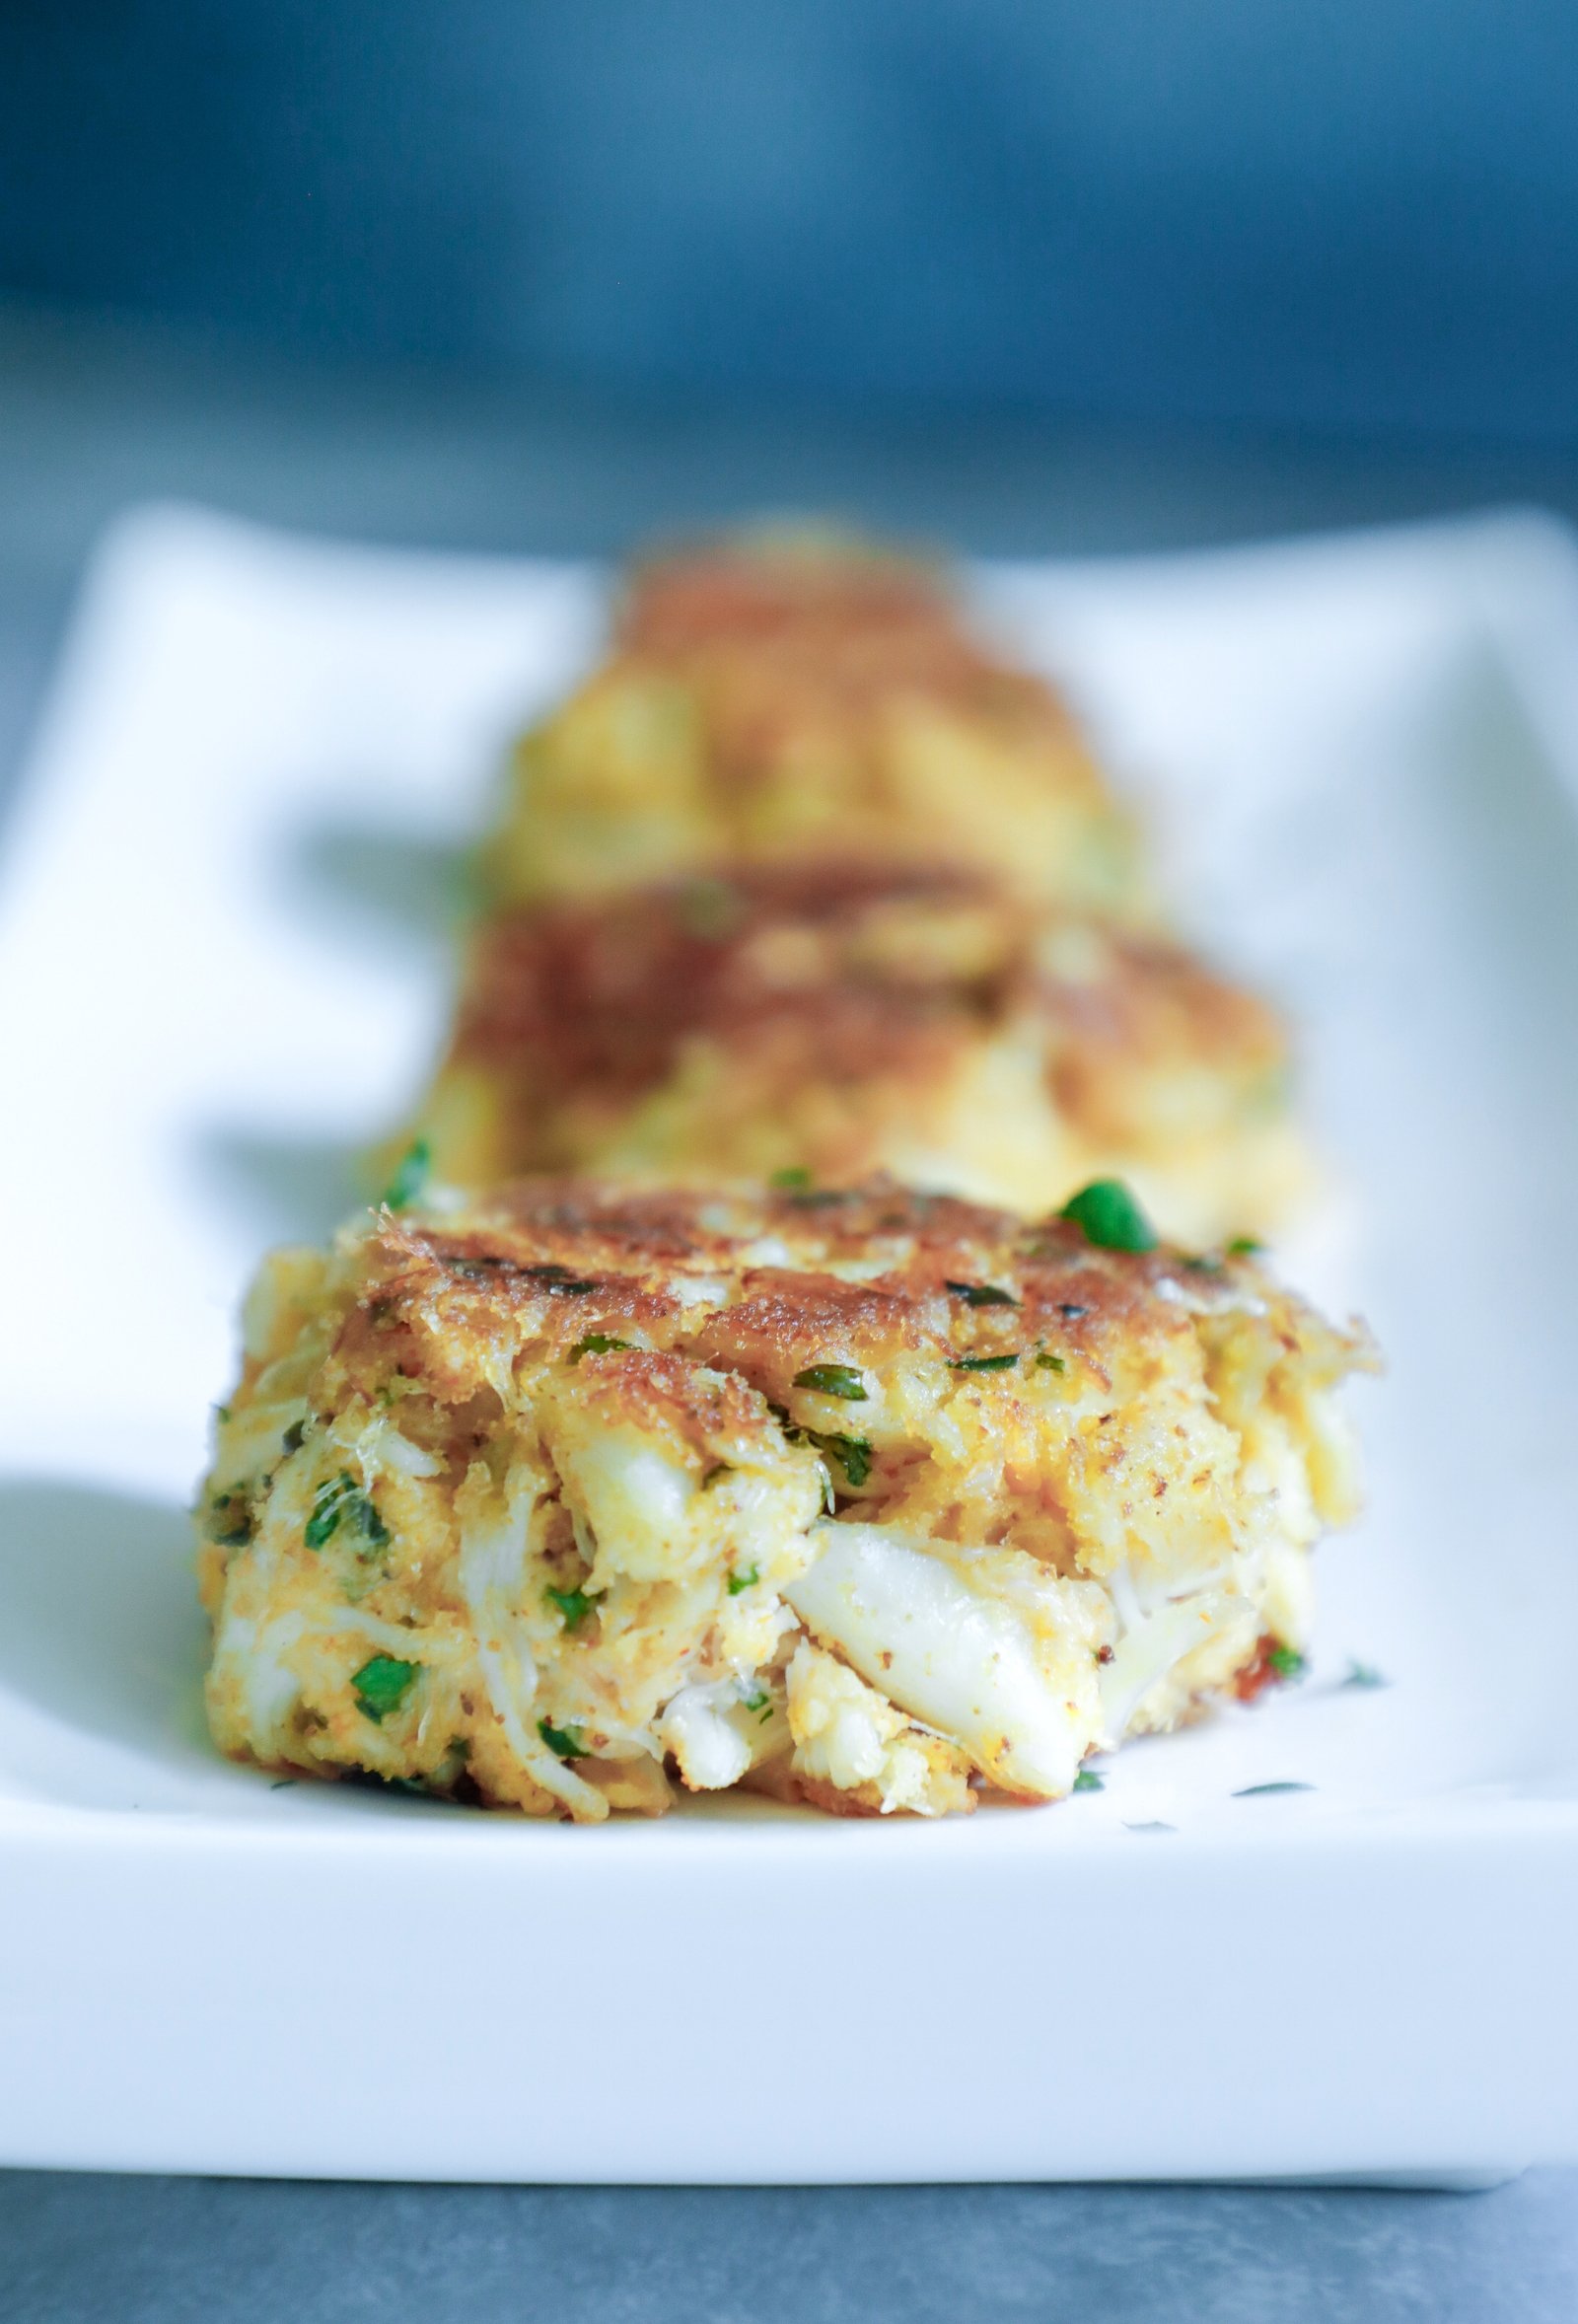 https://www.ibreatheimhungry.com/wp-content/uploads/2012/08/crabcakes2.jpg